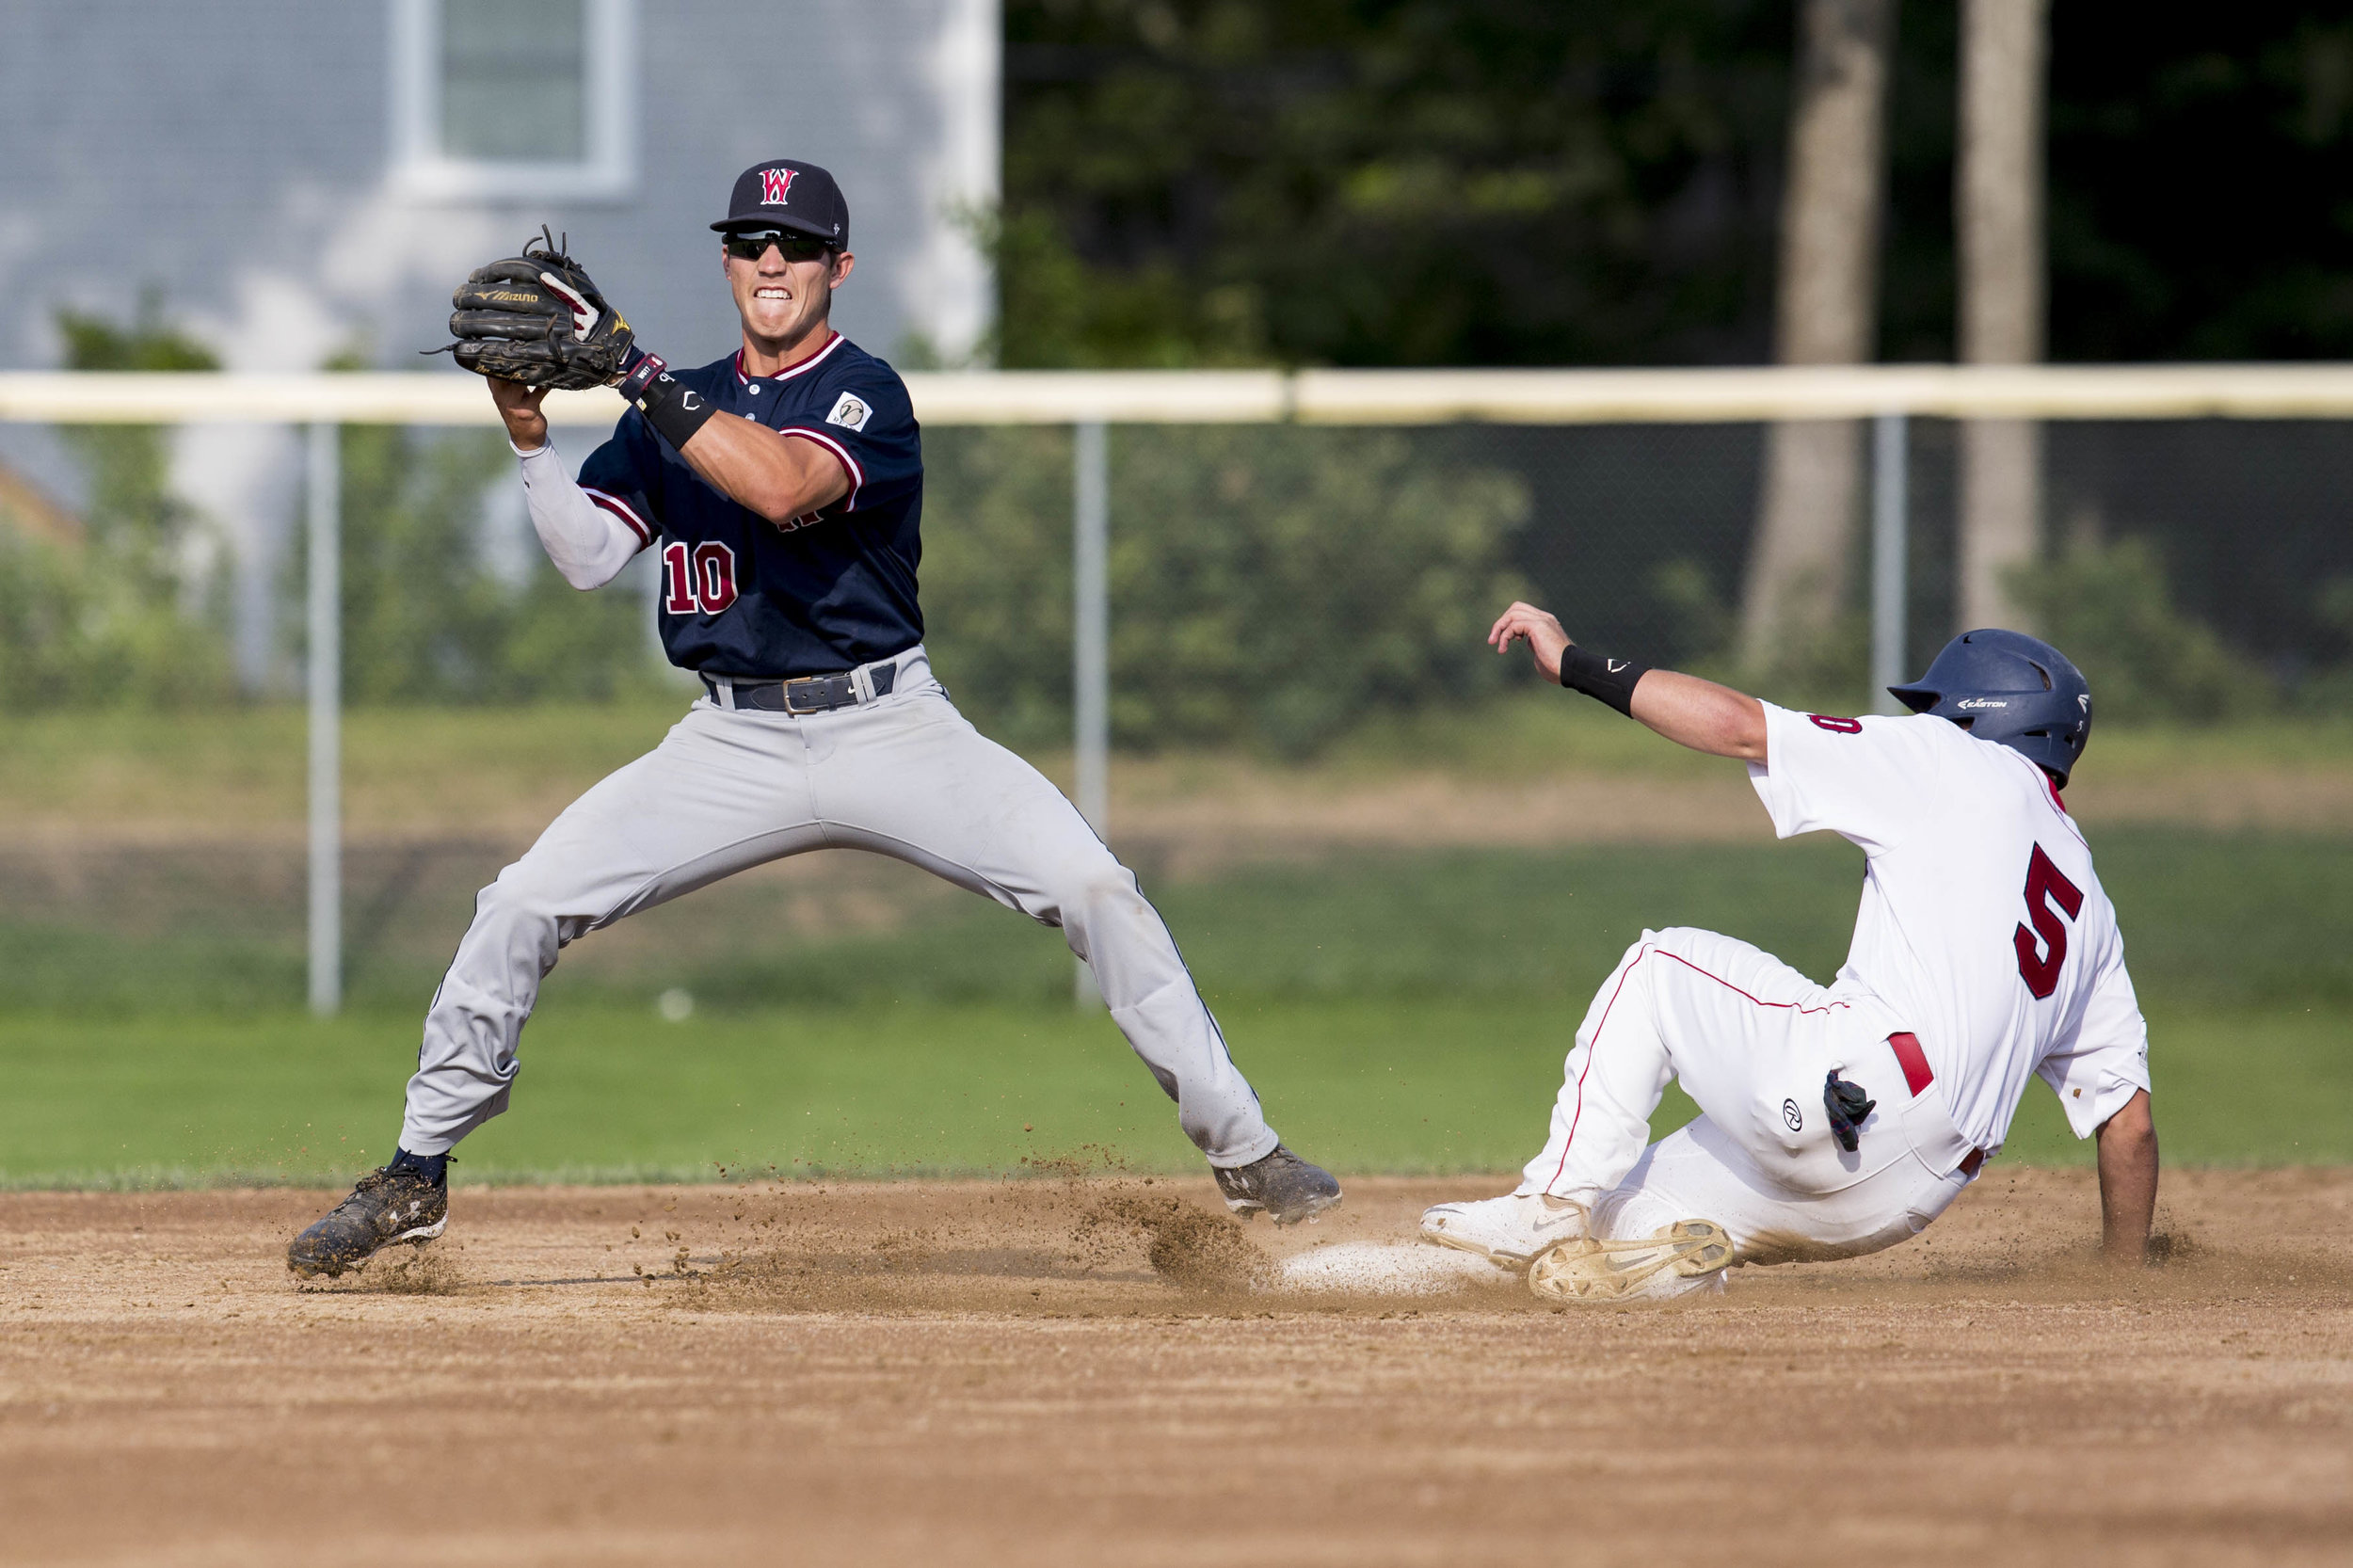  Carter Pharis slides to second as Jarren Duran attempts to get him out during the Yarmouth-Dennis Red Sox home game against the Wareham Gatemen on July 23, 2017. Pharis was called safe at second. 